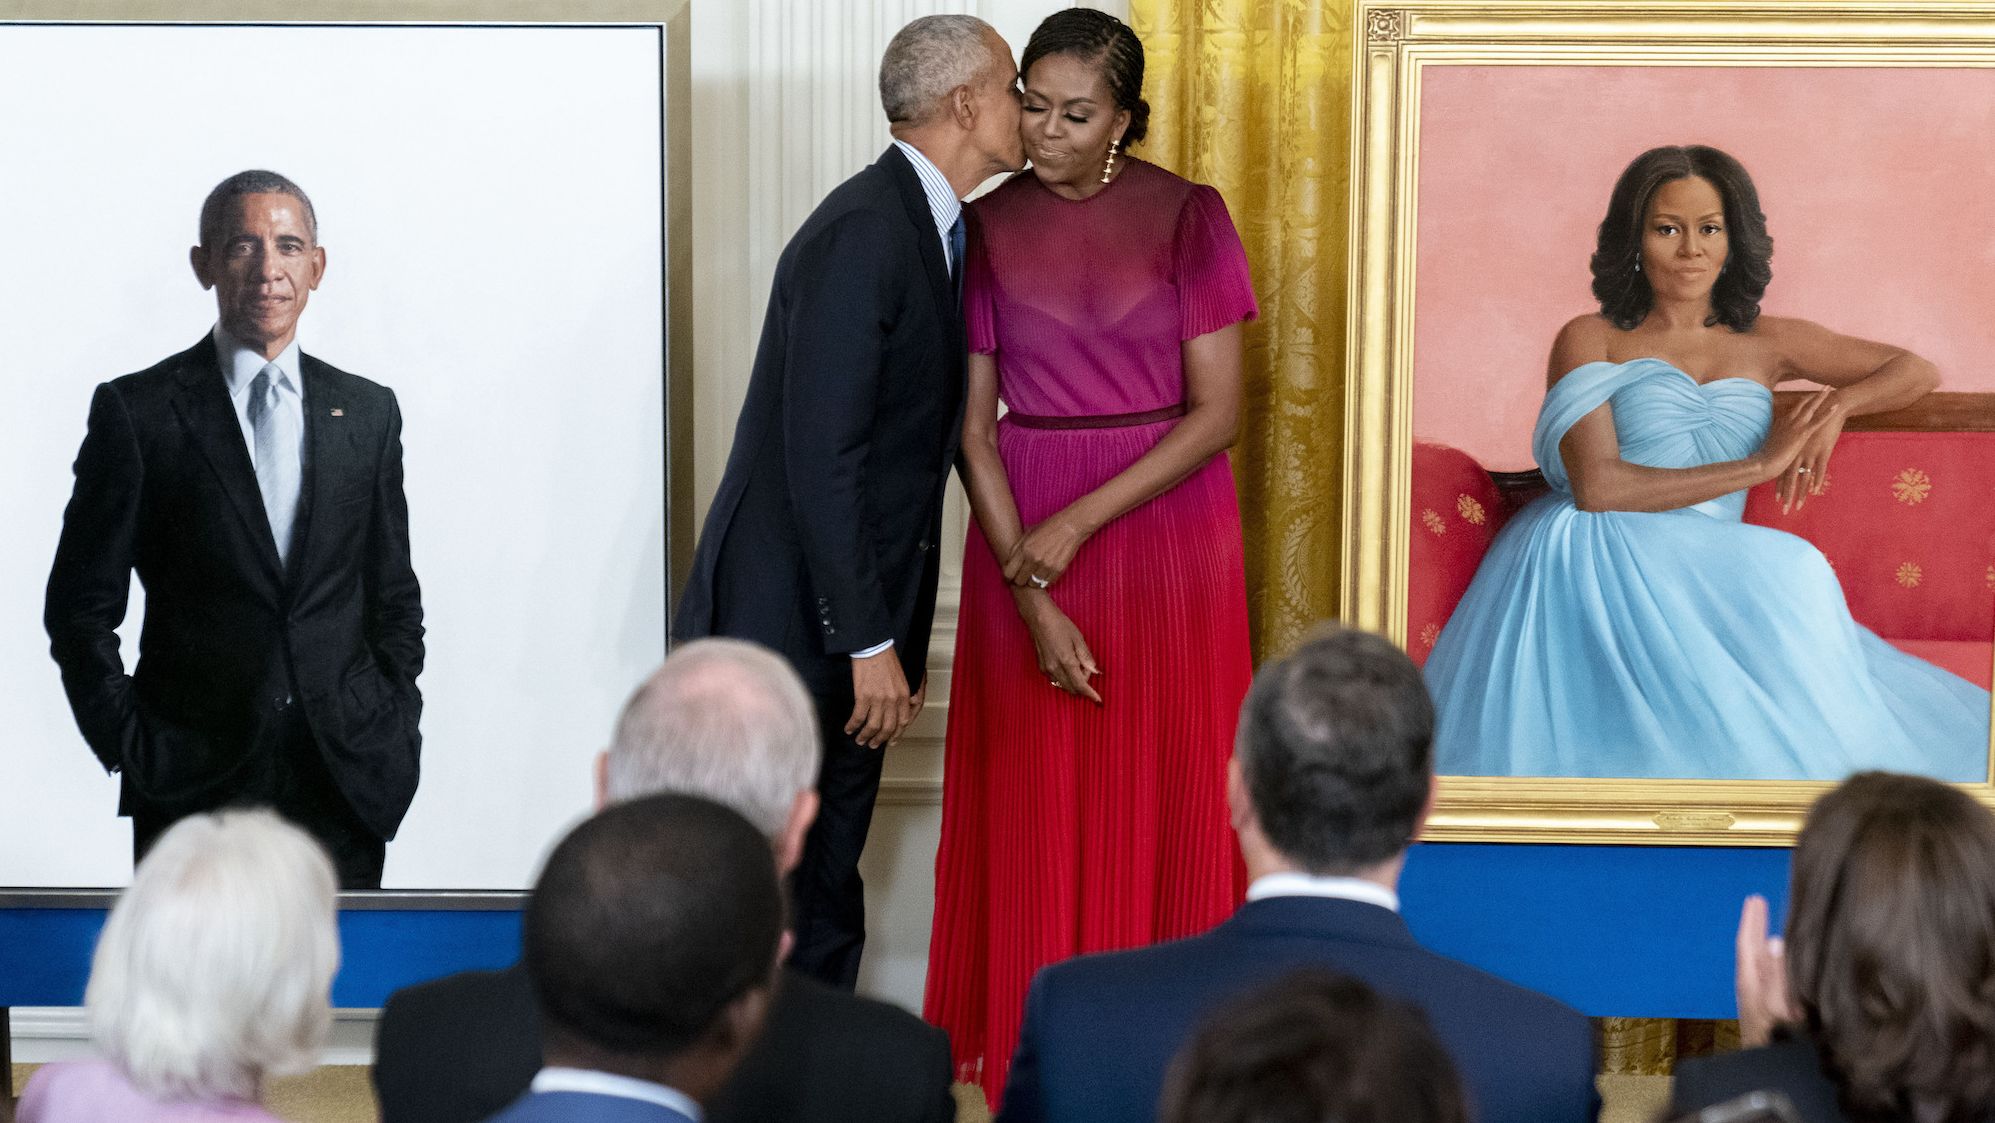 Former US President Barack Obama kisses his wife, former first lady Michelle Obama, after <a href="https://www.cnn.com/2022/09/07/politics/obamas-white-house-official-portraits/index.html" target="_blank">the unveiling of their official White House portraits</a> on Wednesday, September 7.